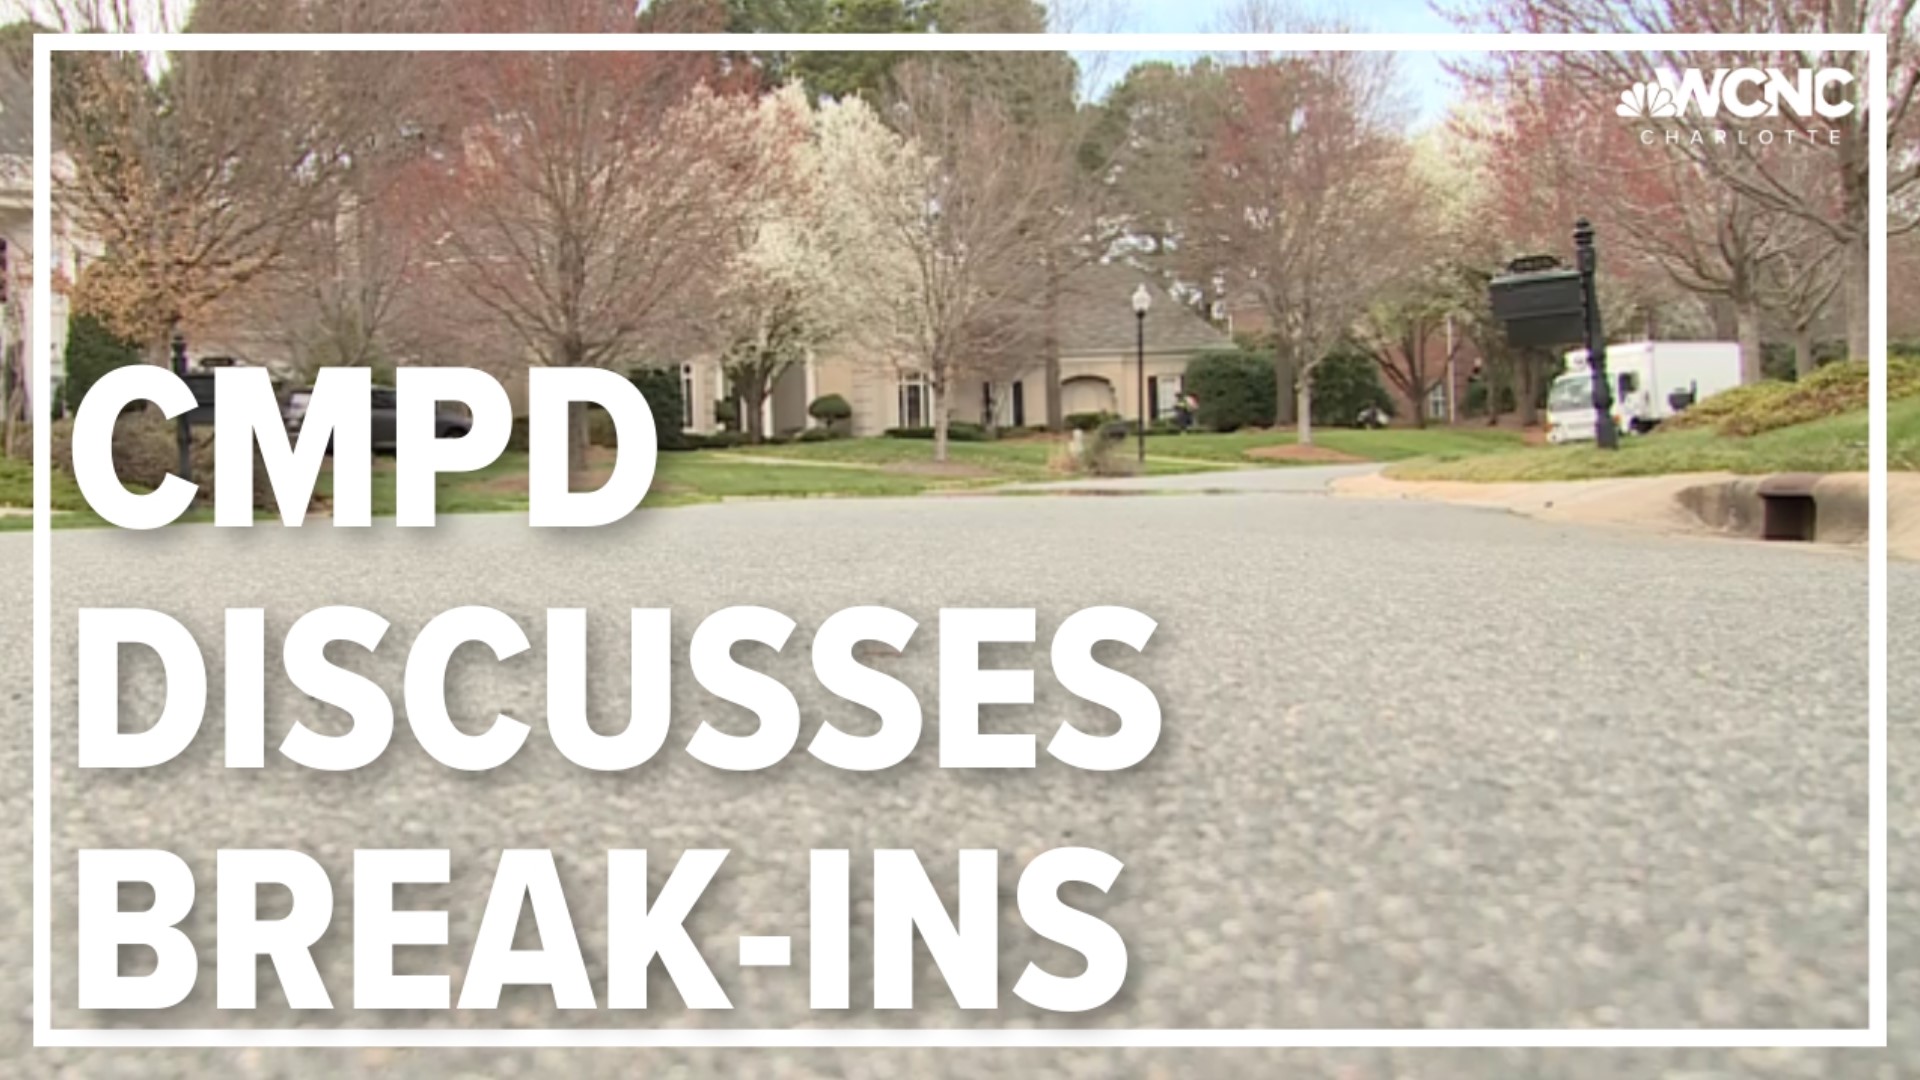 CMPD says groups of criminals could be behind a slew of recent break-ins.